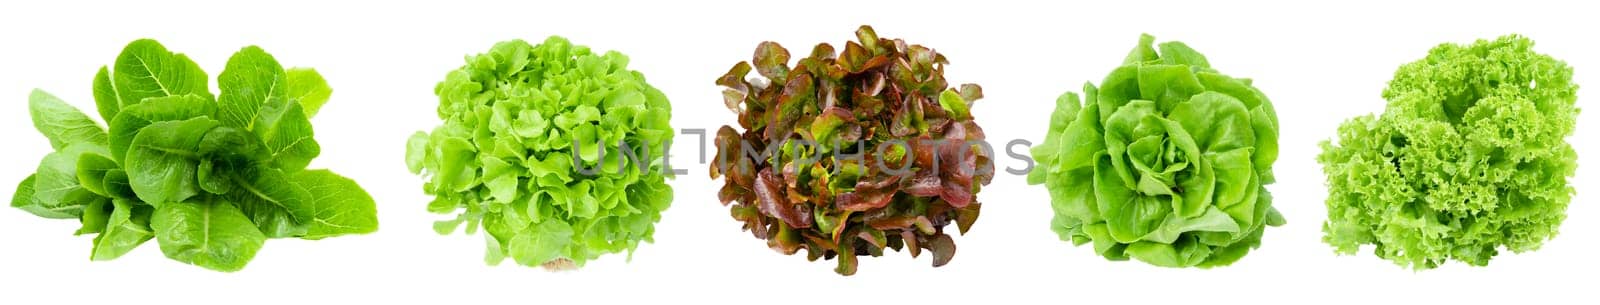 Set of Fresh Romaine Lettuce , Cos Lettuce, Red and Green Oakleaf lettuce Vegetable salad isolated on white background. by Gamjai